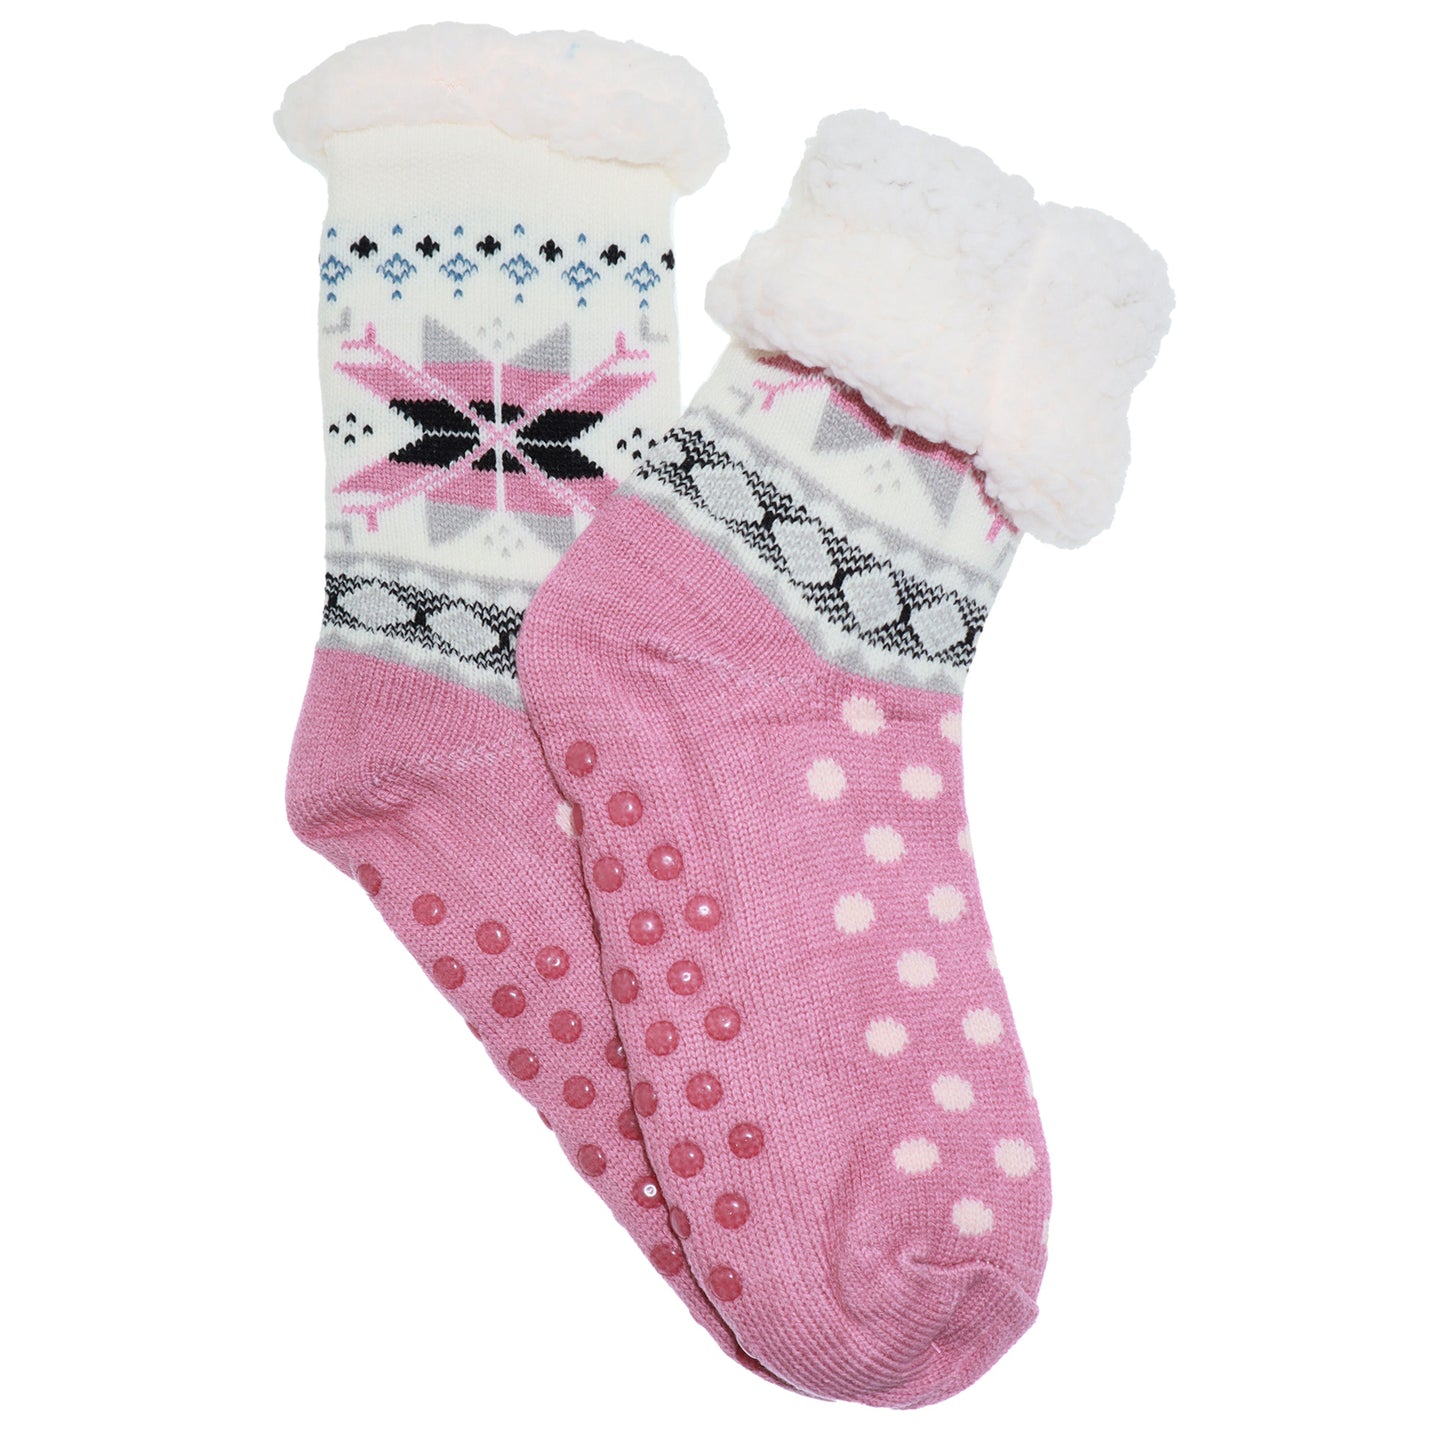 Angelina Winter-Weight Sherpa-Lined Knitted Thermal Crew Socks (3-Pairs), #WF1911